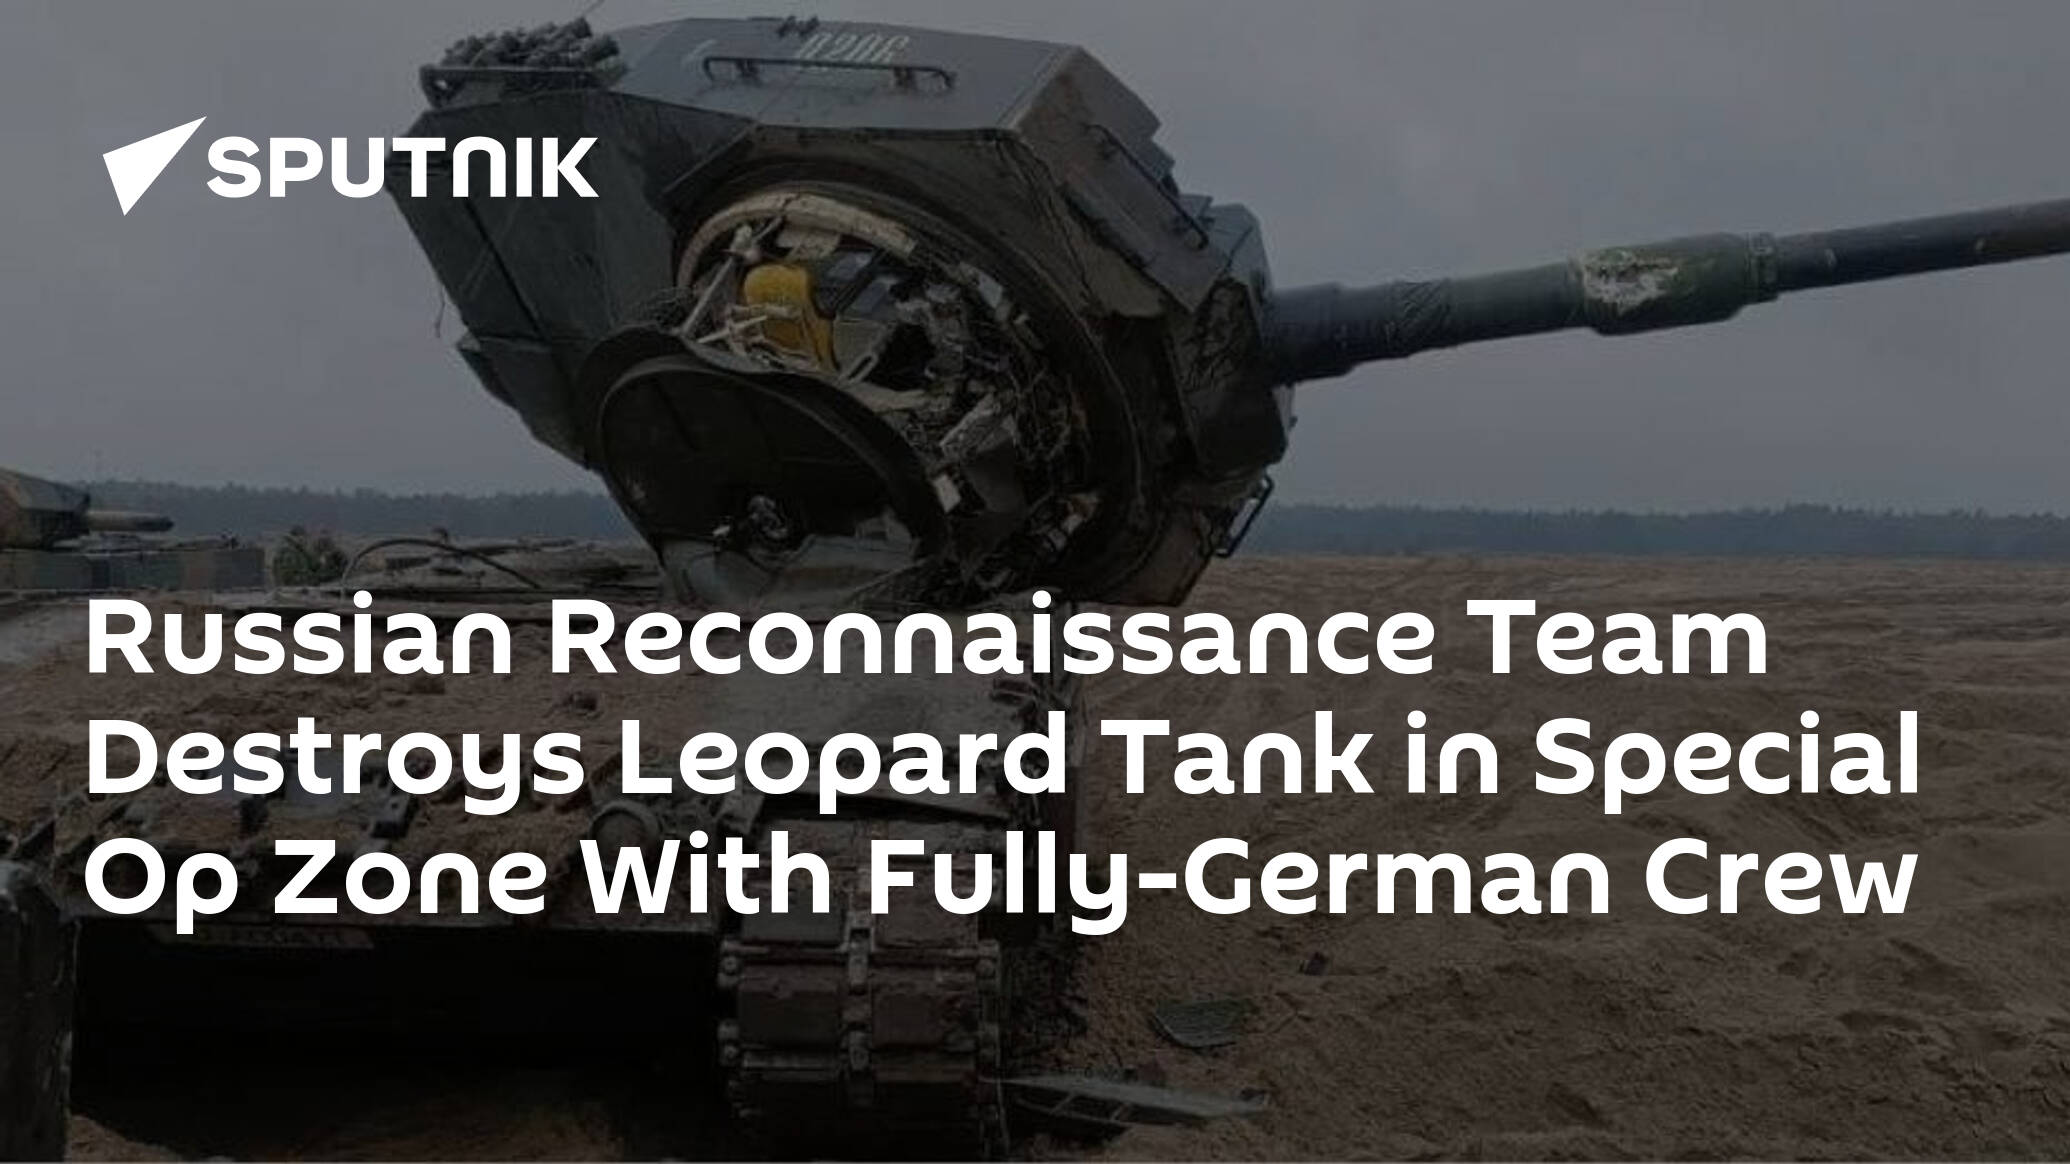 Russian Reconnaissance Team Destroys Leopard Tank in Special Op Zone With Fully-German Crew